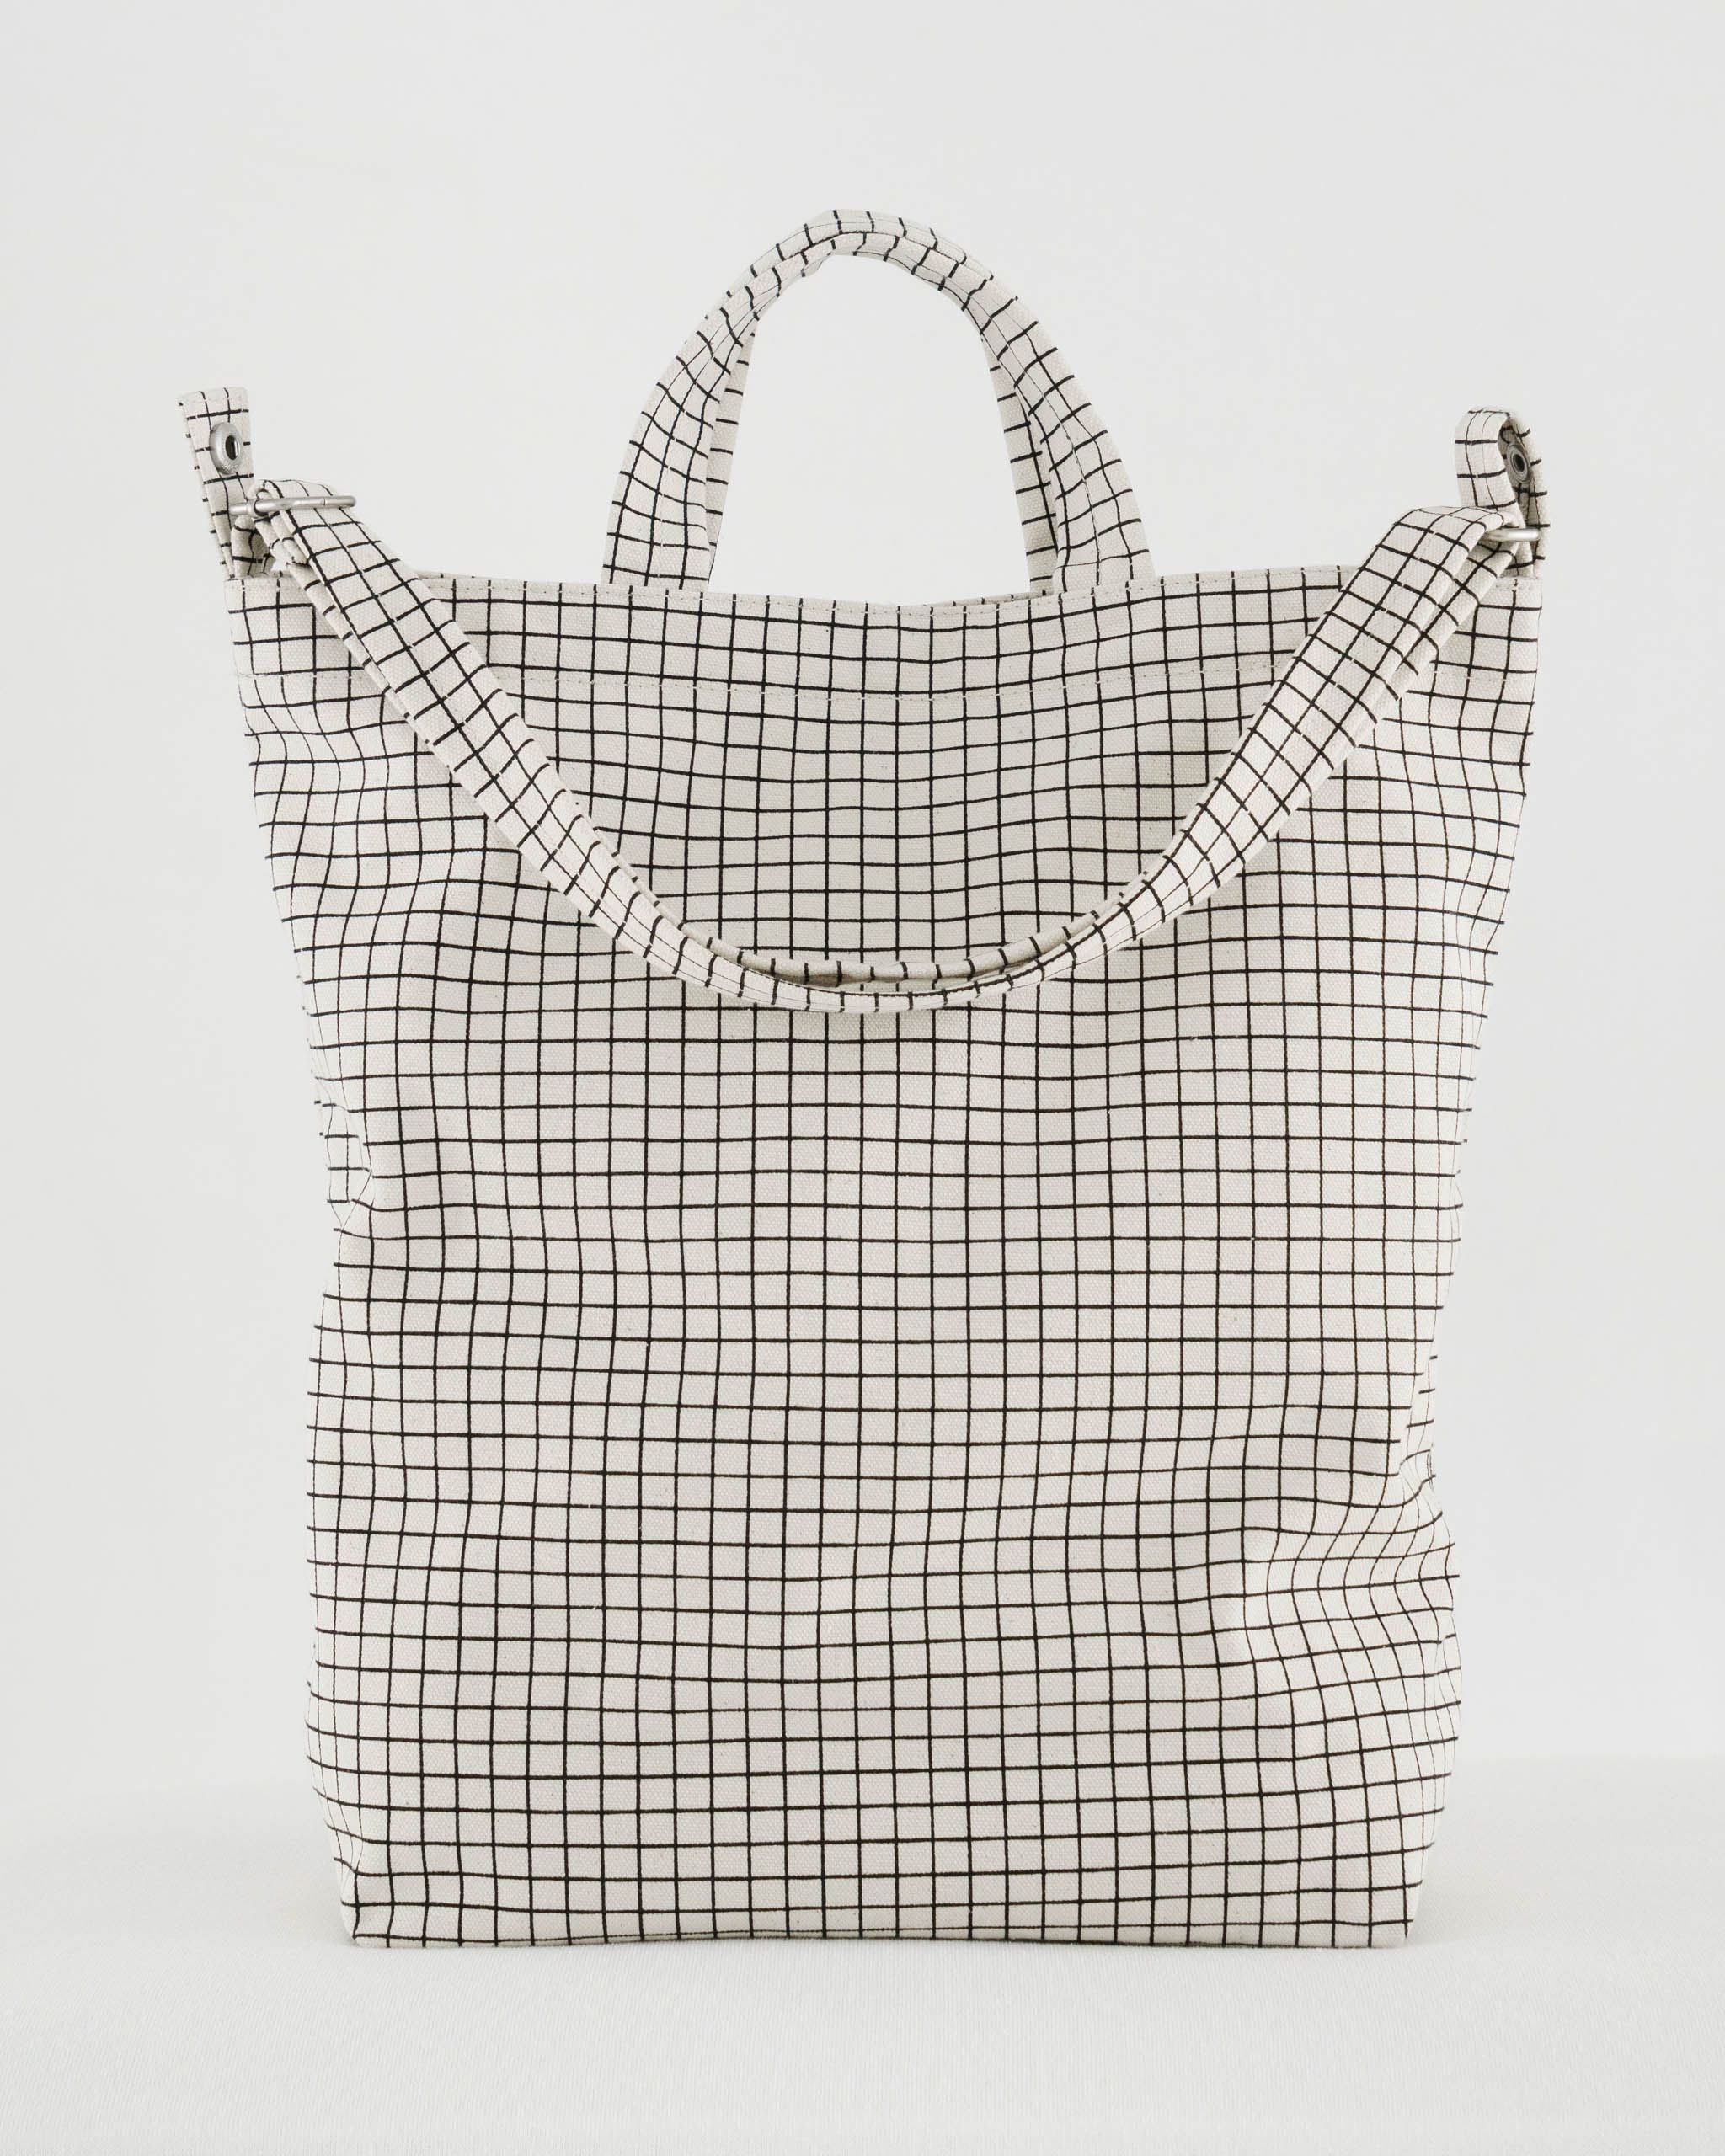 Duck Bag by Jessica Rodriguez – Brooklyn Museum Shop